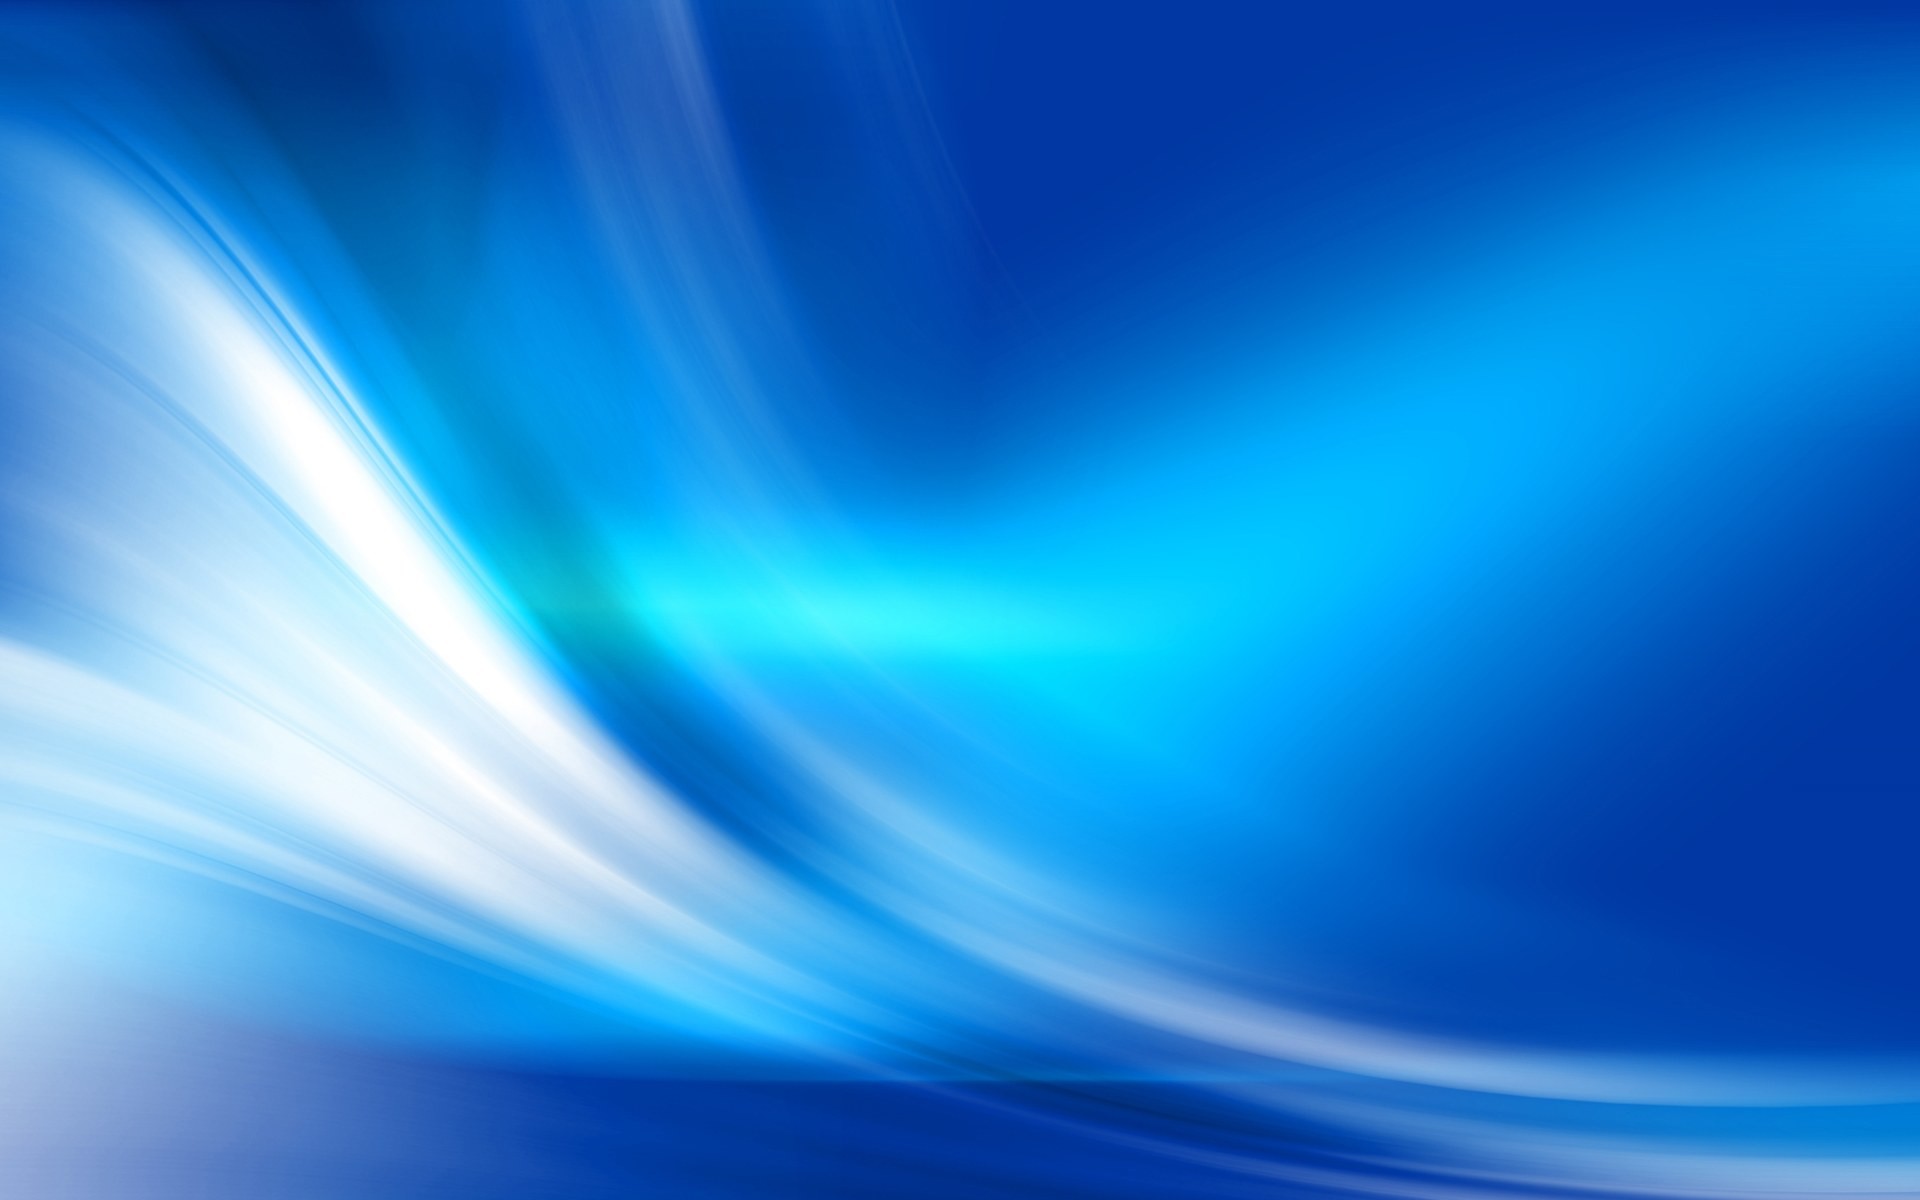 Blue Abstract | abstract-blue-backgrounds-3_1920x1200_71441.jpg Â· Blue  WallpapersWidescreen …